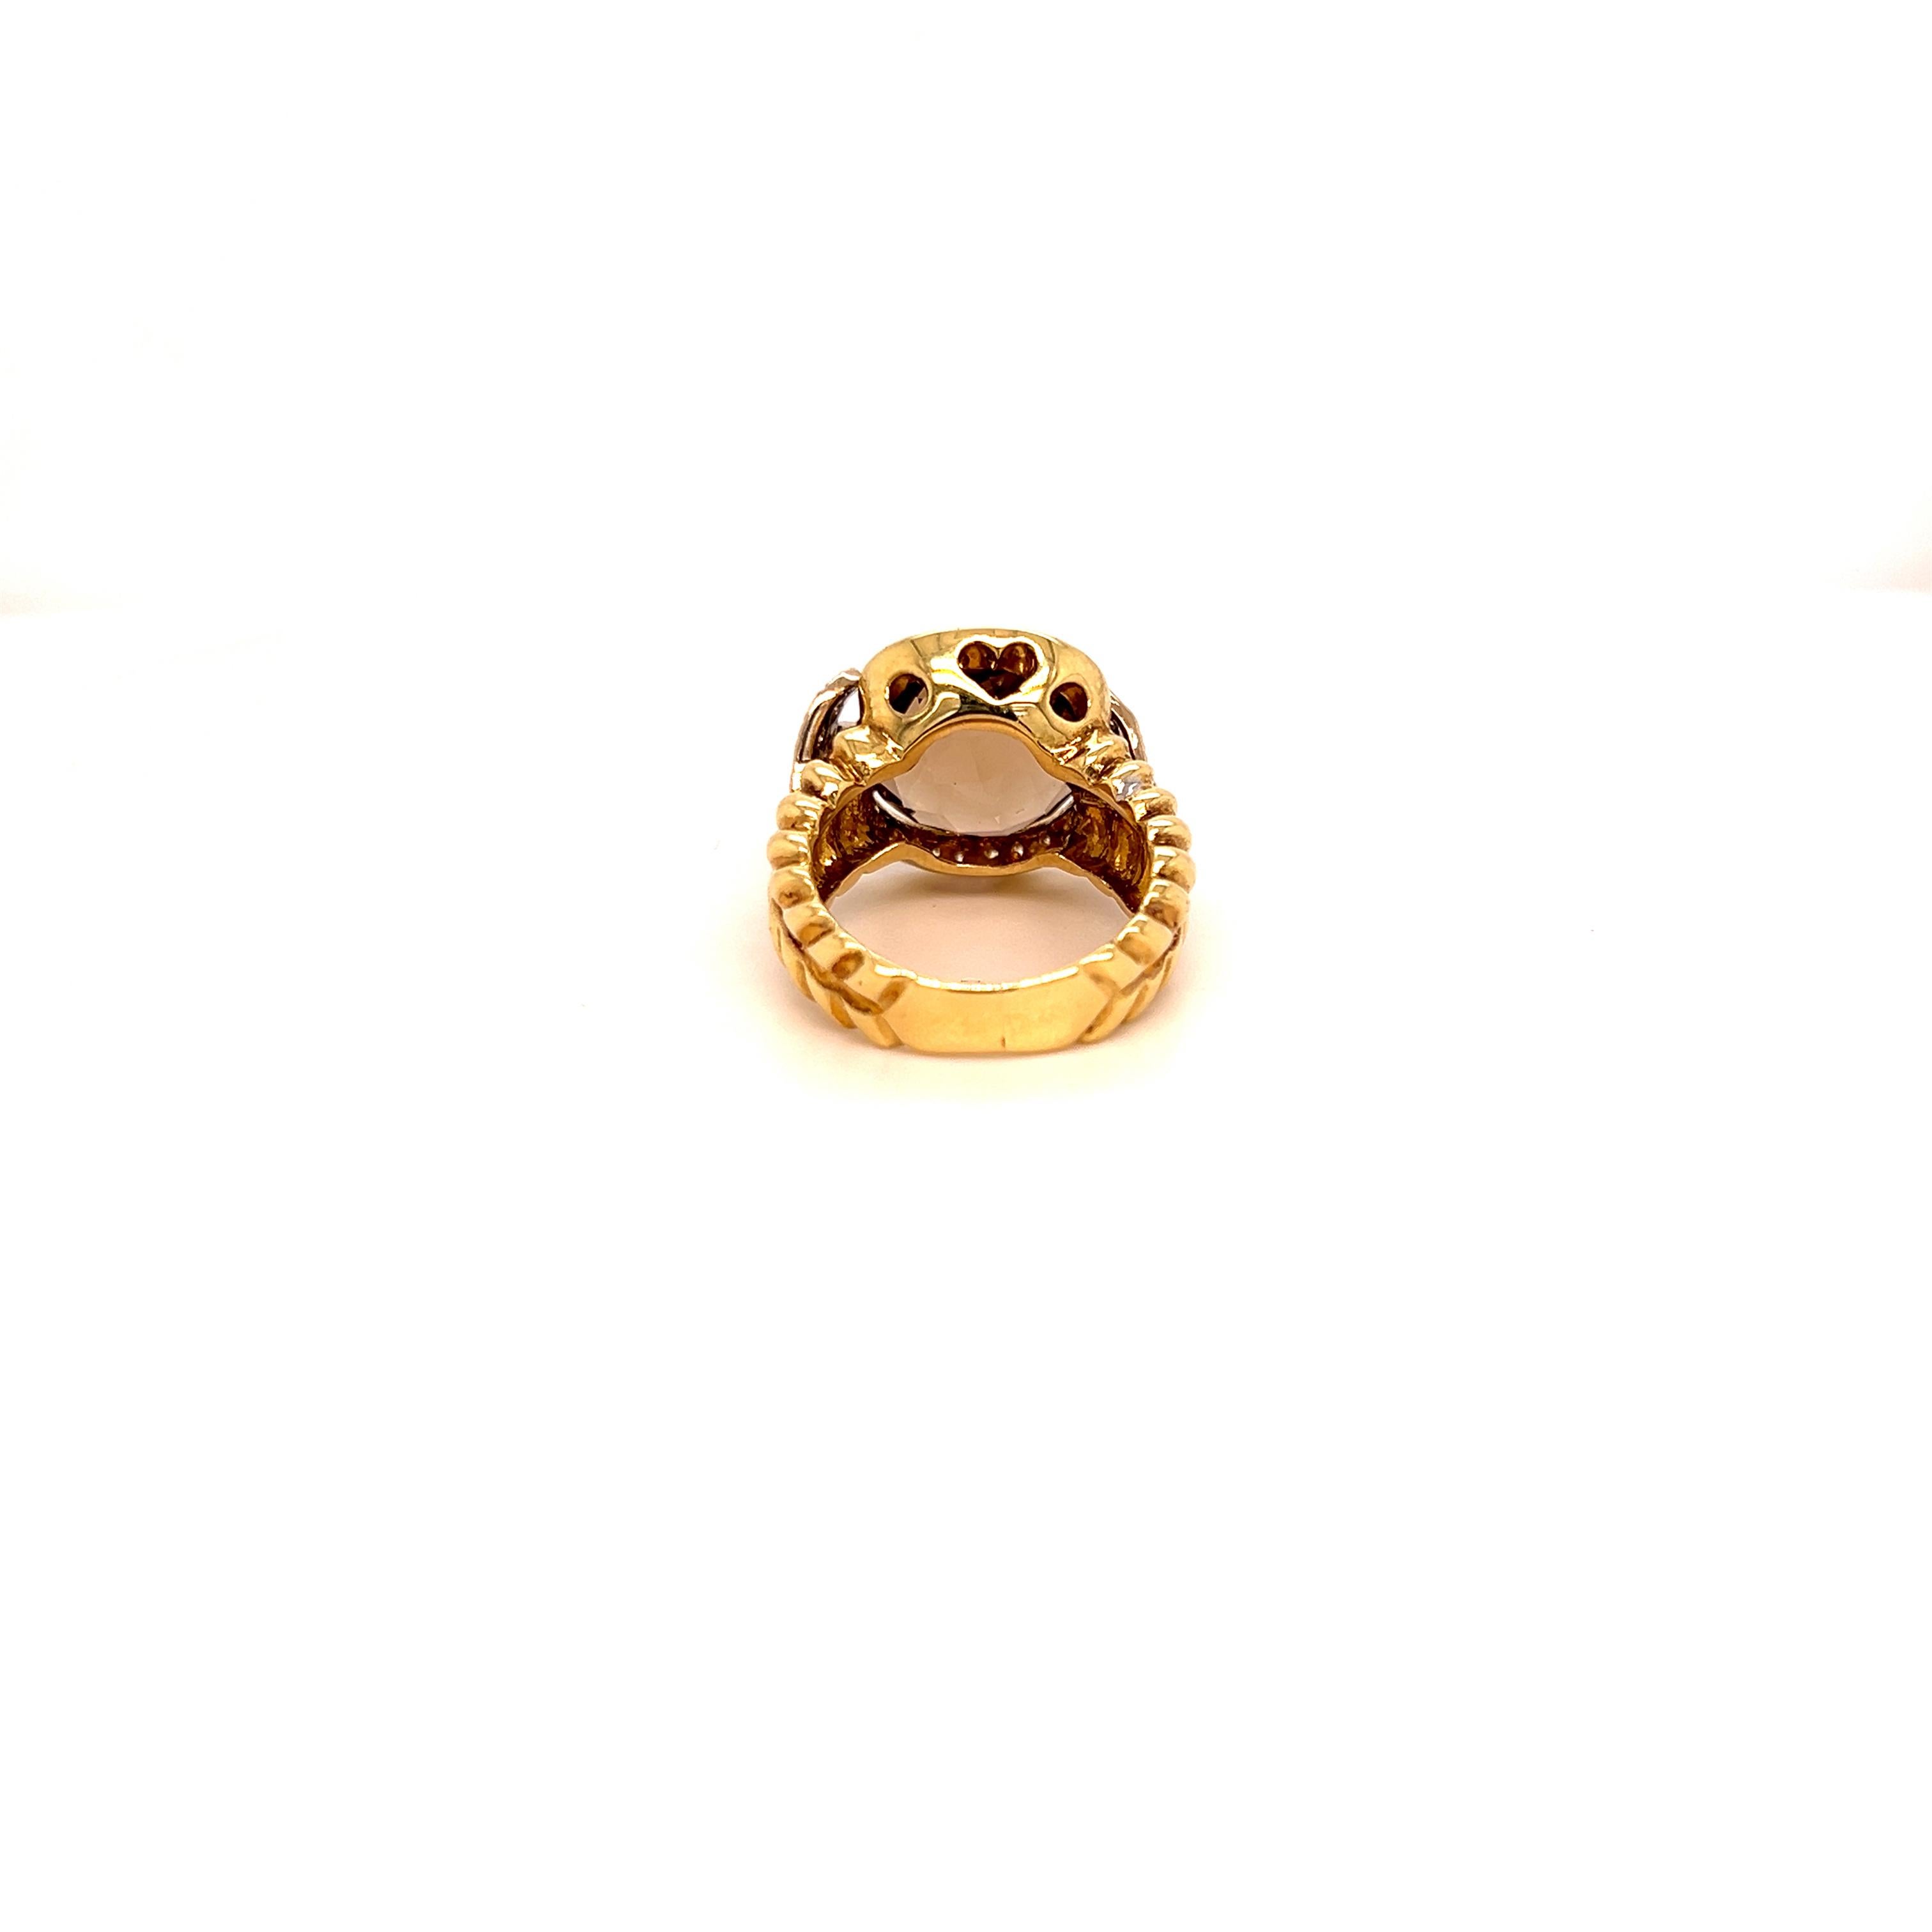 14K Gold and Diamond Ring with Checkerboard Cut Smoky Topaz Center

Apprx. 0.40ct. diamonds

Ring face measures 16.5mm in width. 6mm band width.

Ring is a size 6, sizable by request